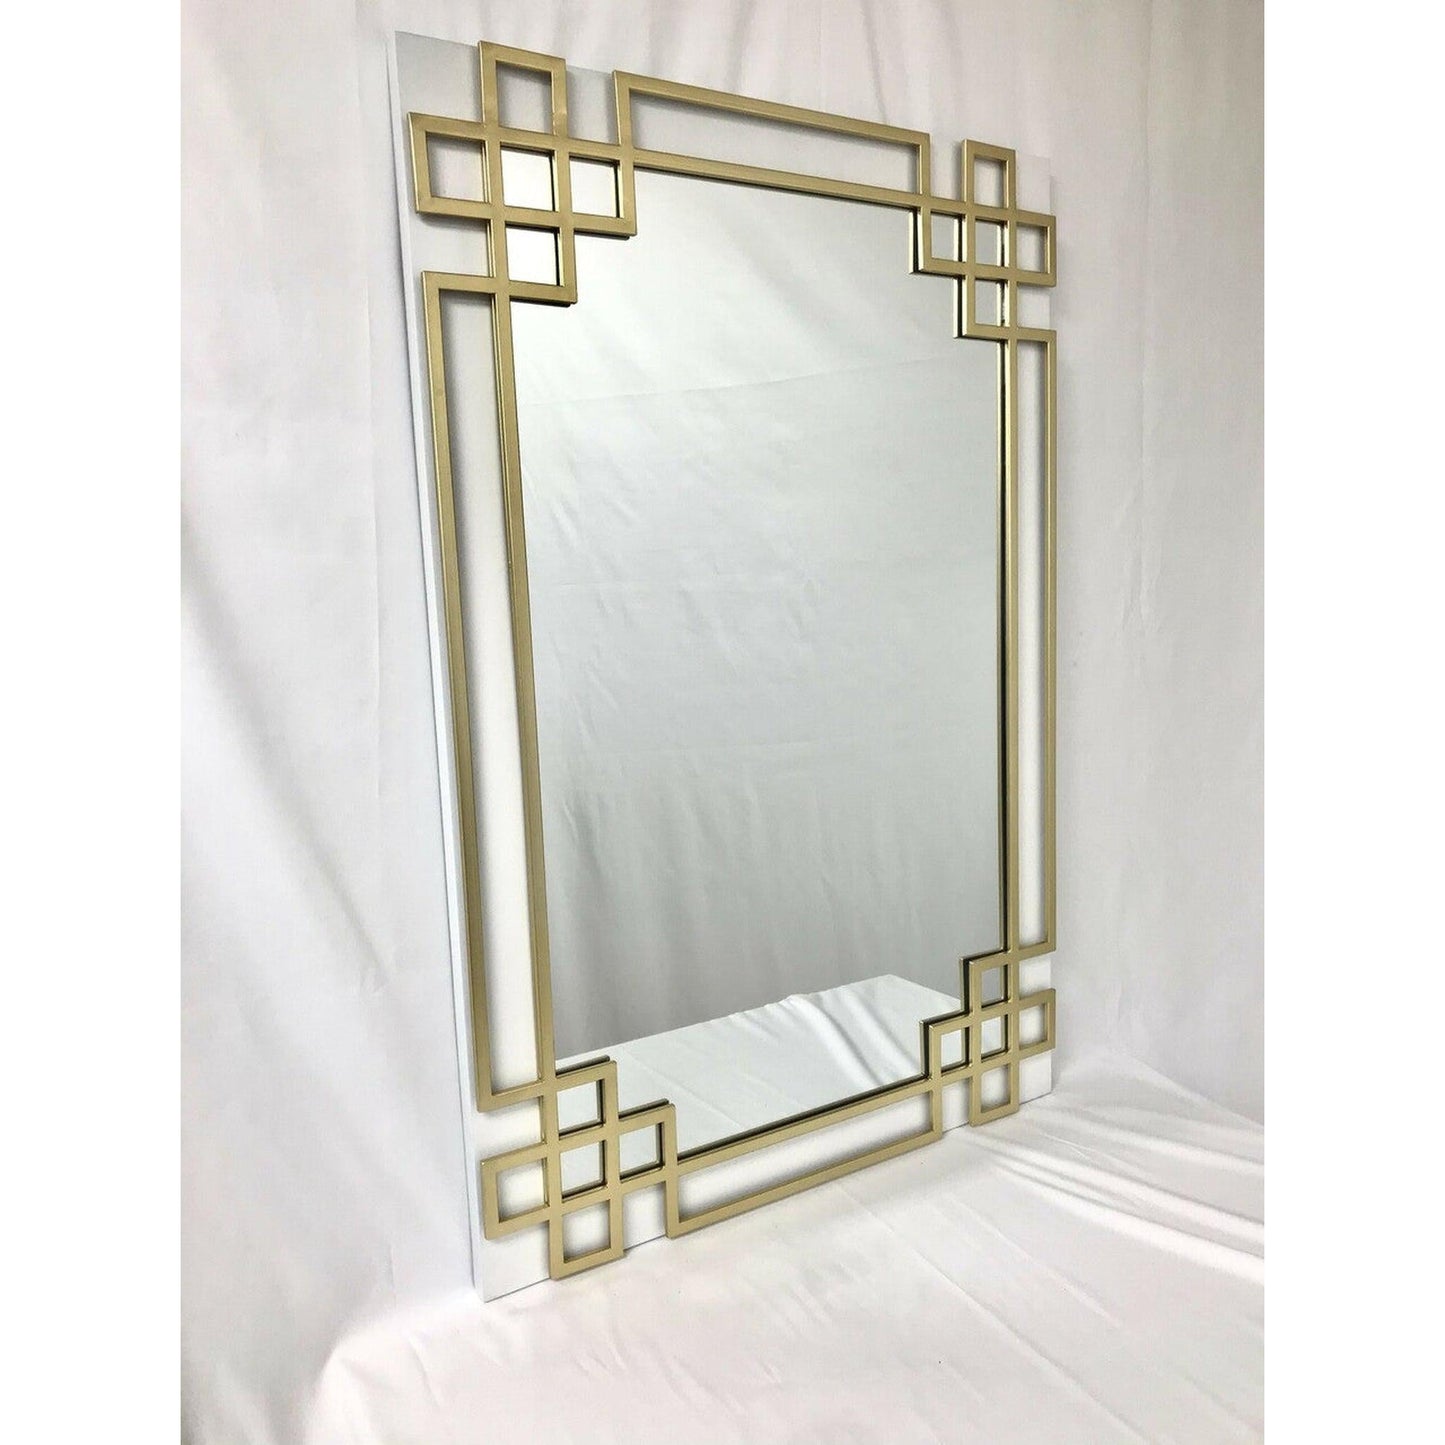 SBC Decor Elegant 28" x 42" Wall-Mounted Wood Frame Dresser Mirror In White with Gold Leaf Iron Overlay Finish